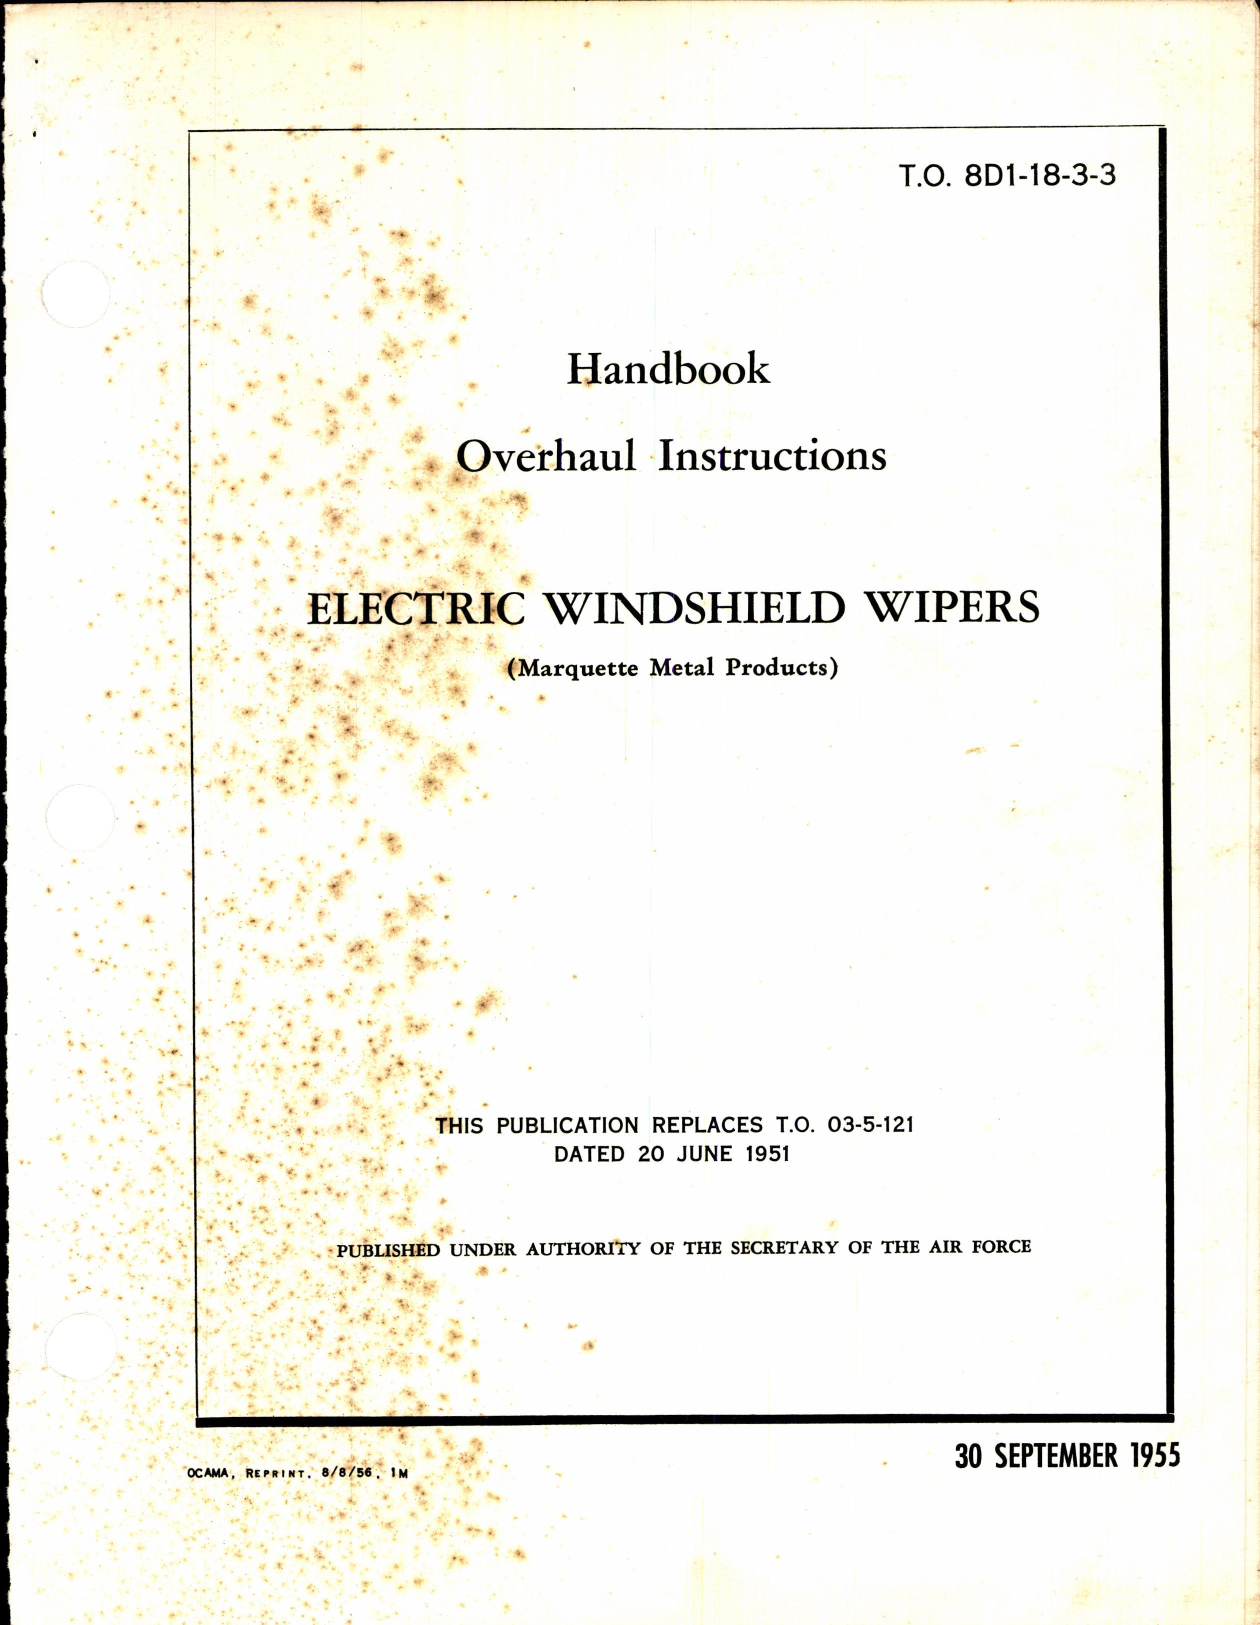 Sample page 1 from AirCorps Library document: Handbook of Overhaul Instructions for Electric Windshield Wipers